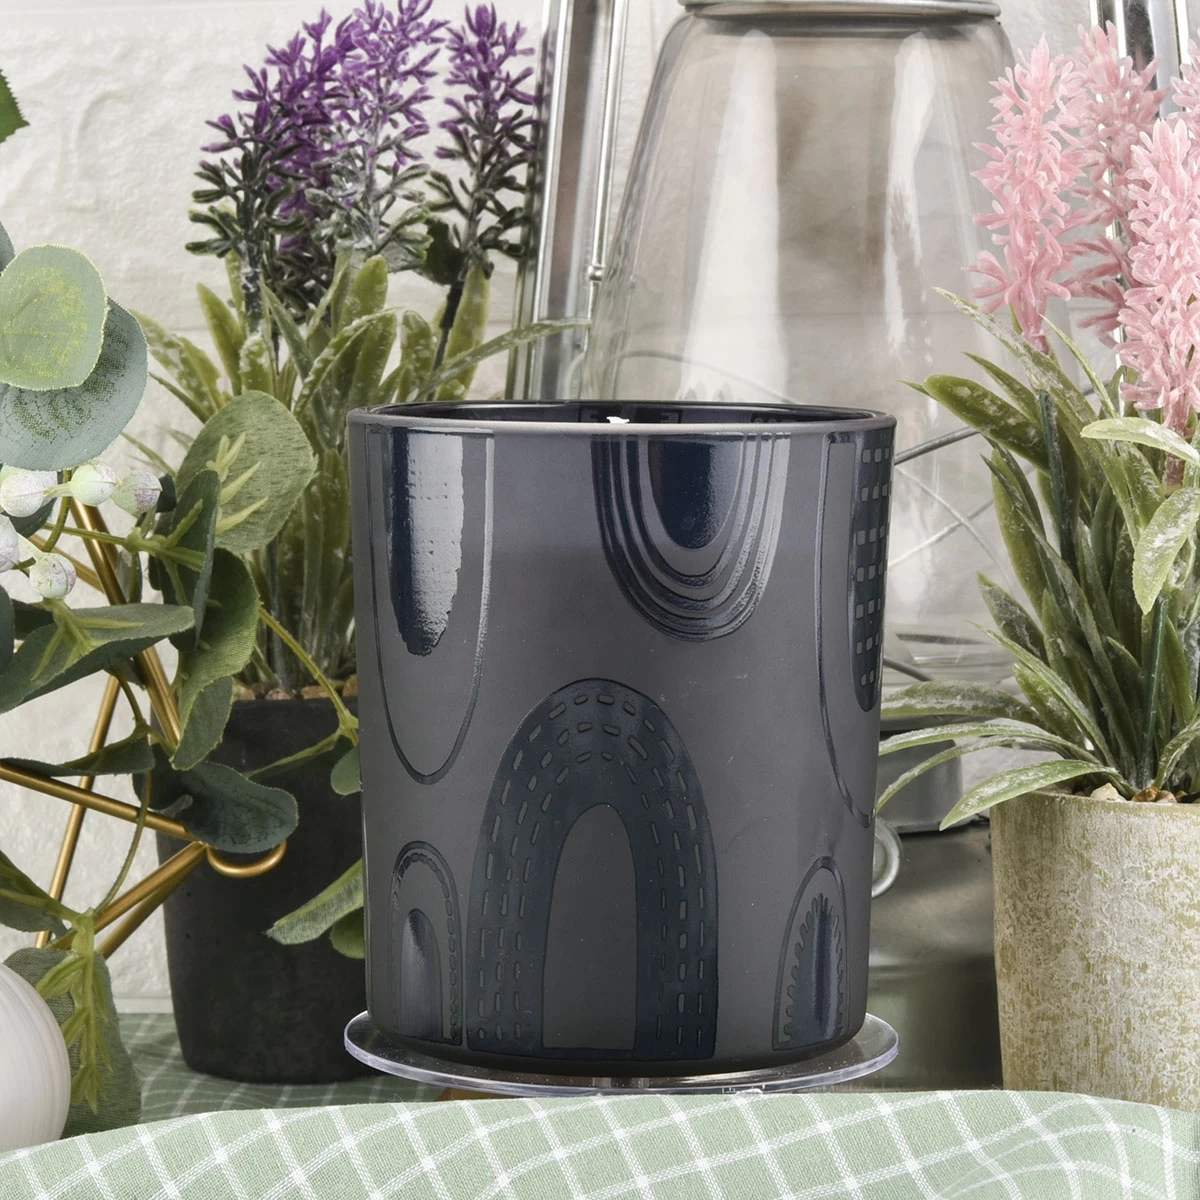 Black glass candle jar with decal printing